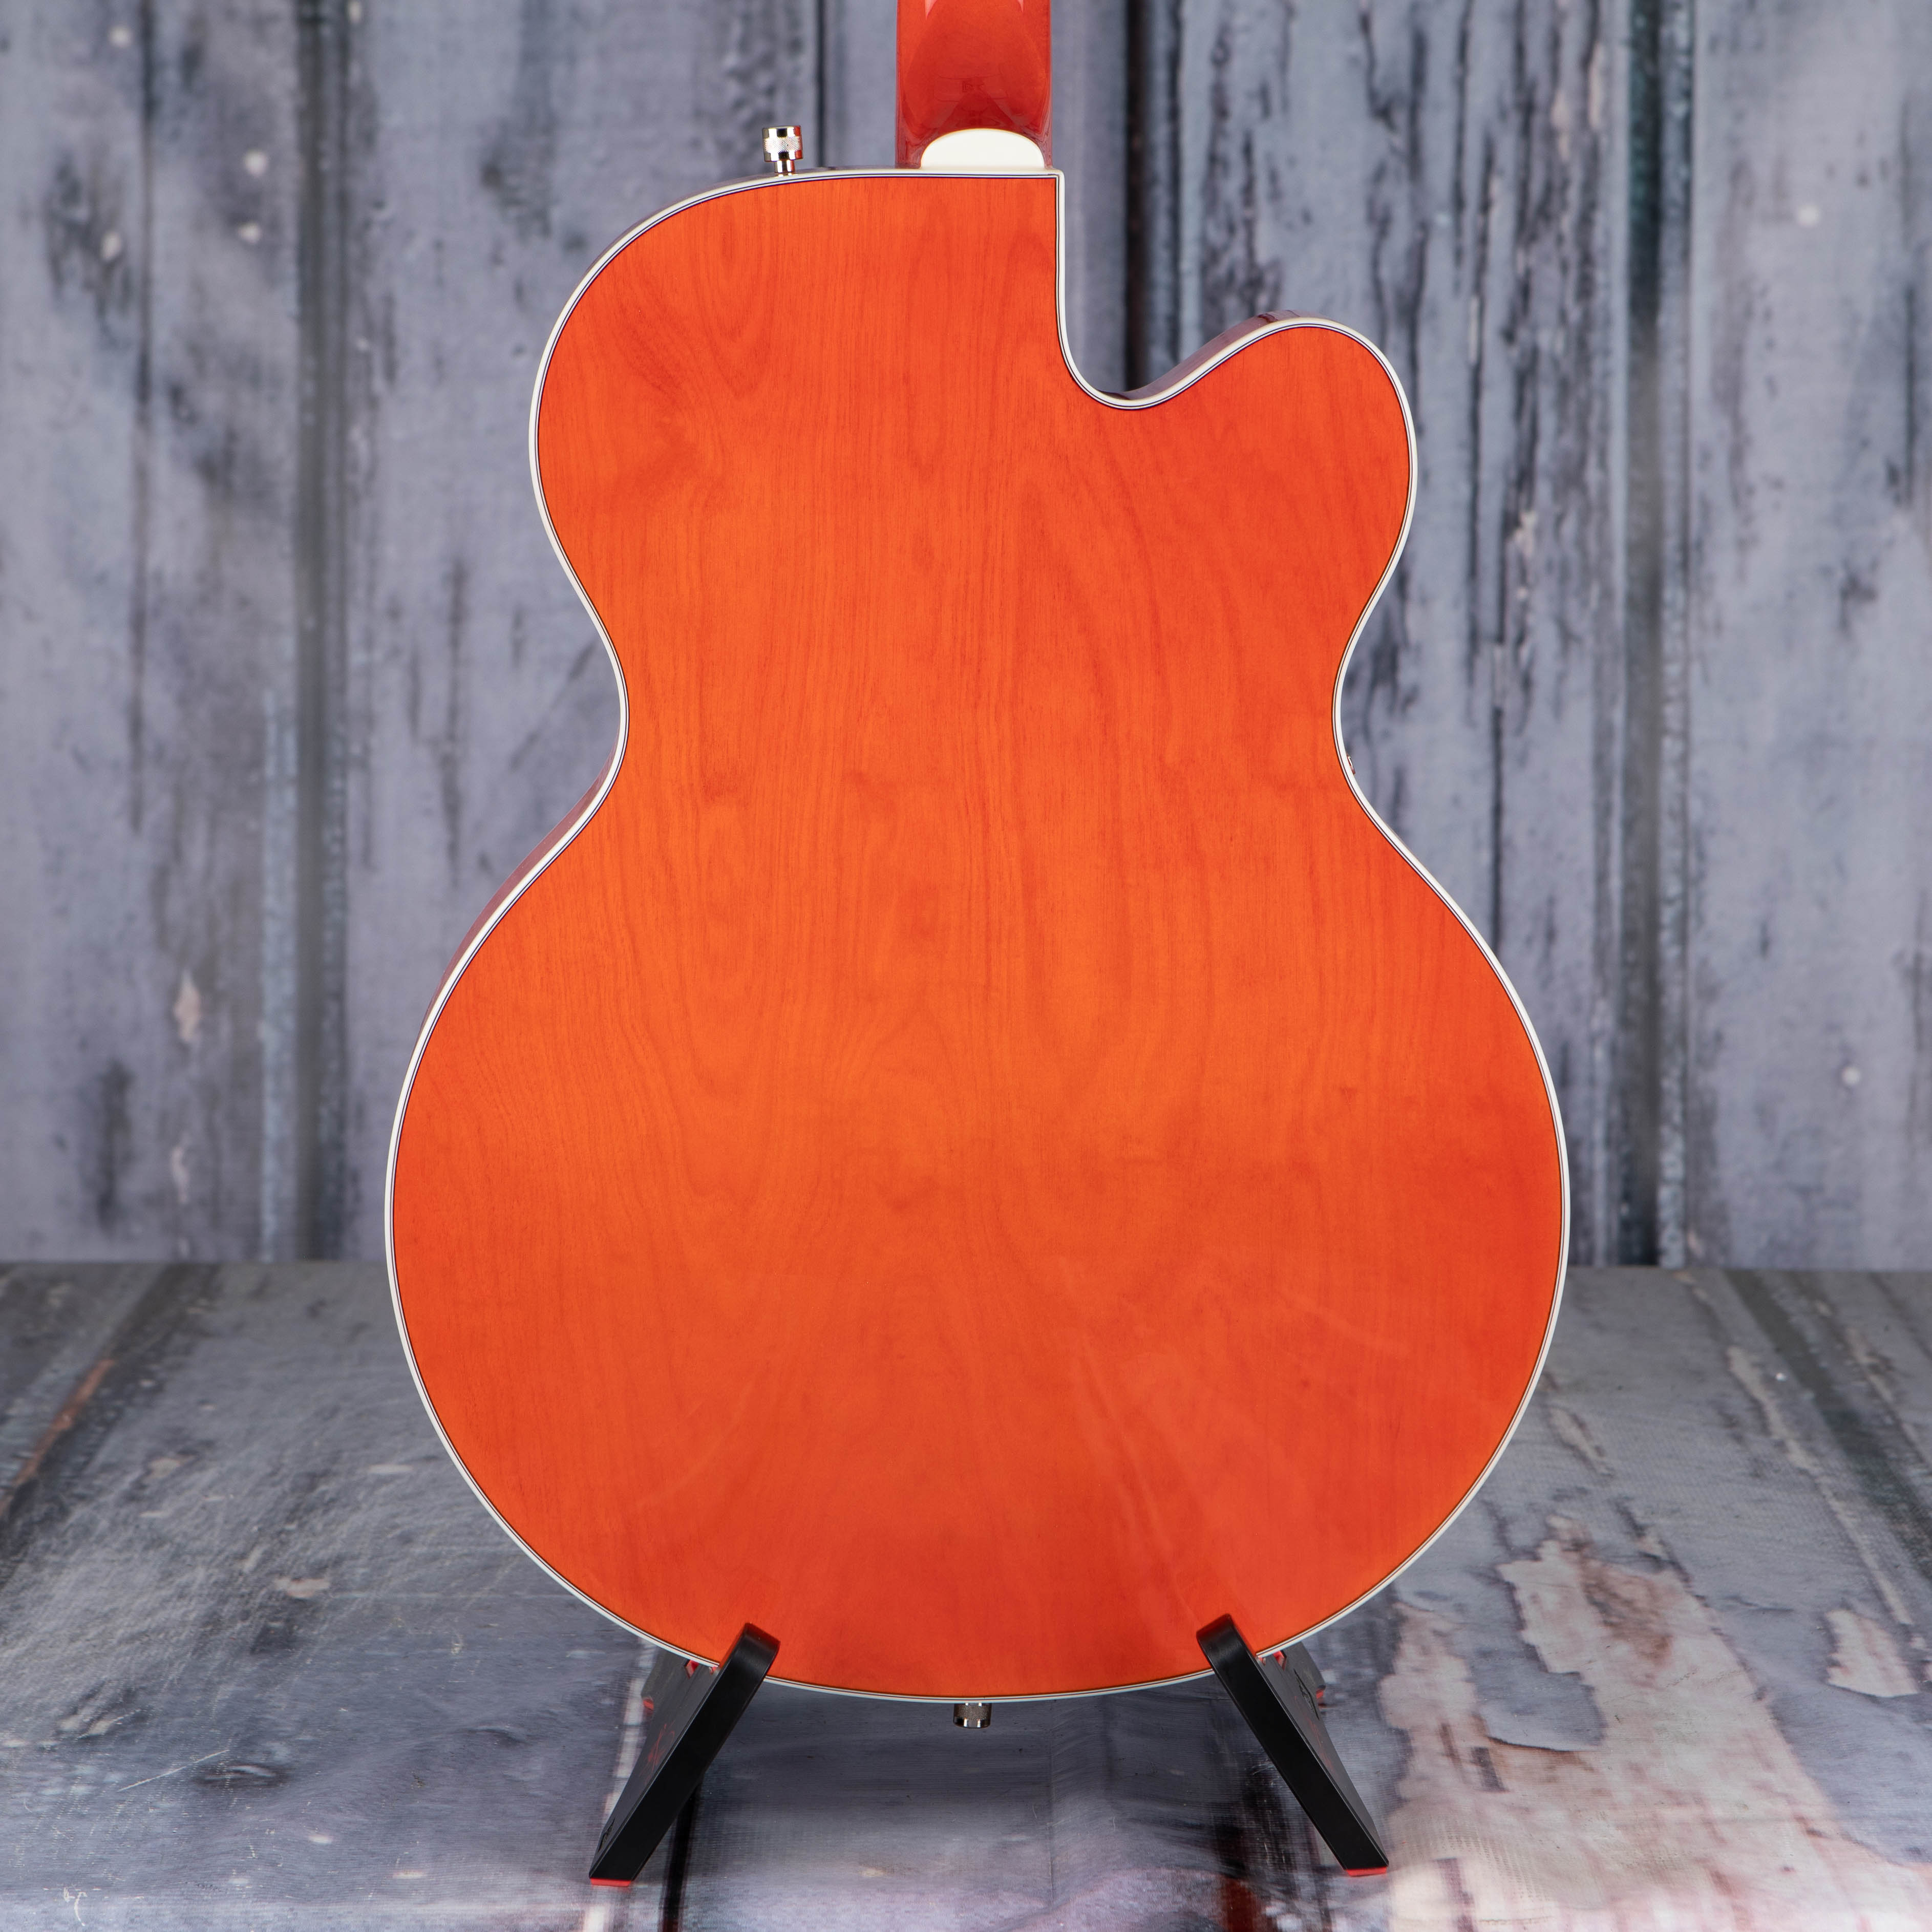 Gretsch G5420LH Electromatic Classic Hollow Body Single-Cut Left-Handed Guitar, Orange Stain, back closeup